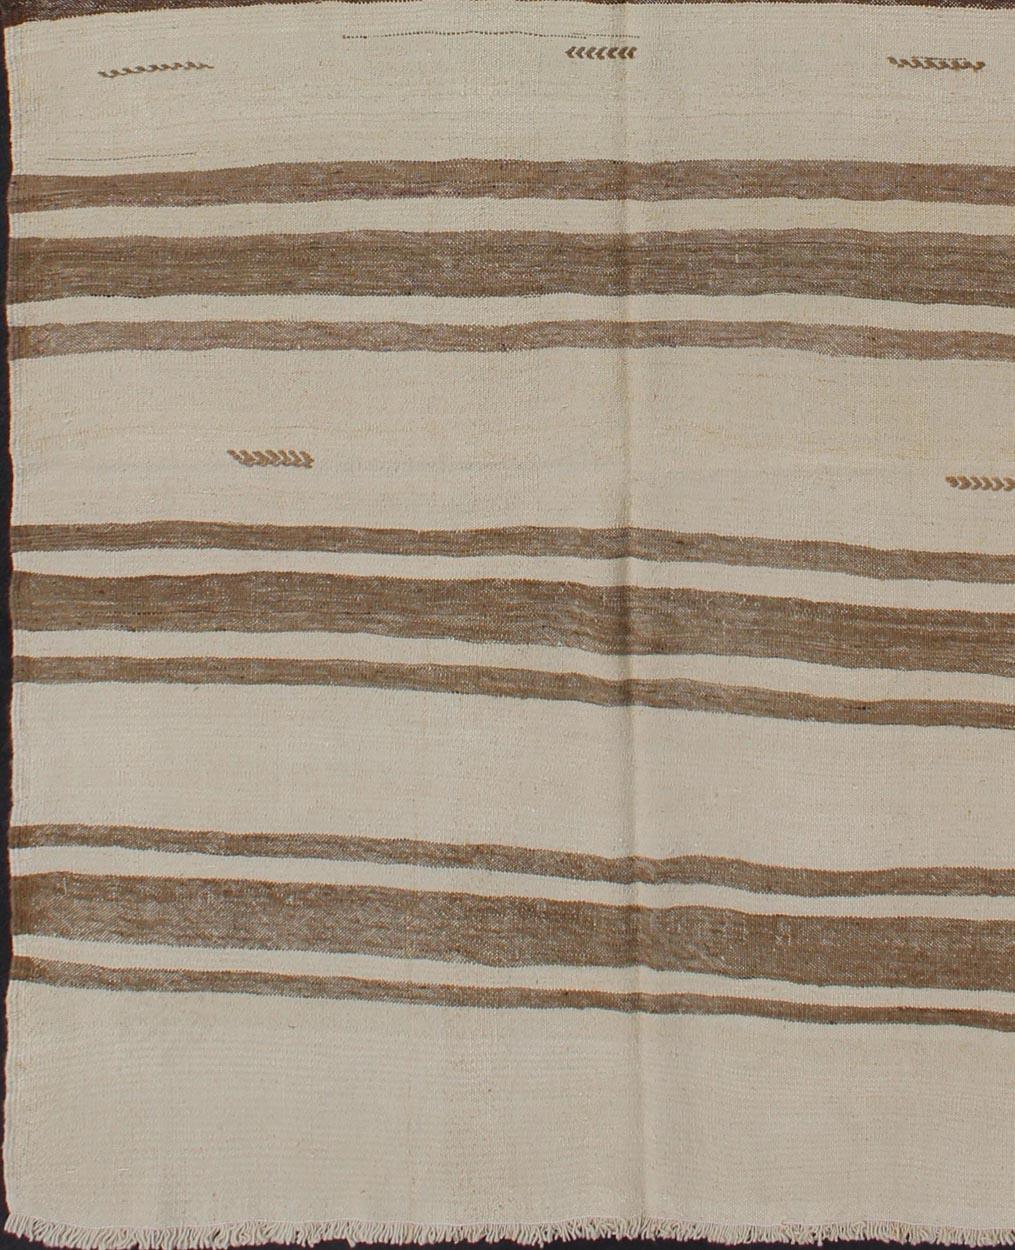 Hand-Woven Turkish Vintage Kilim Flat-Weave Rug in Brown and Cream with Stripe Design For Sale